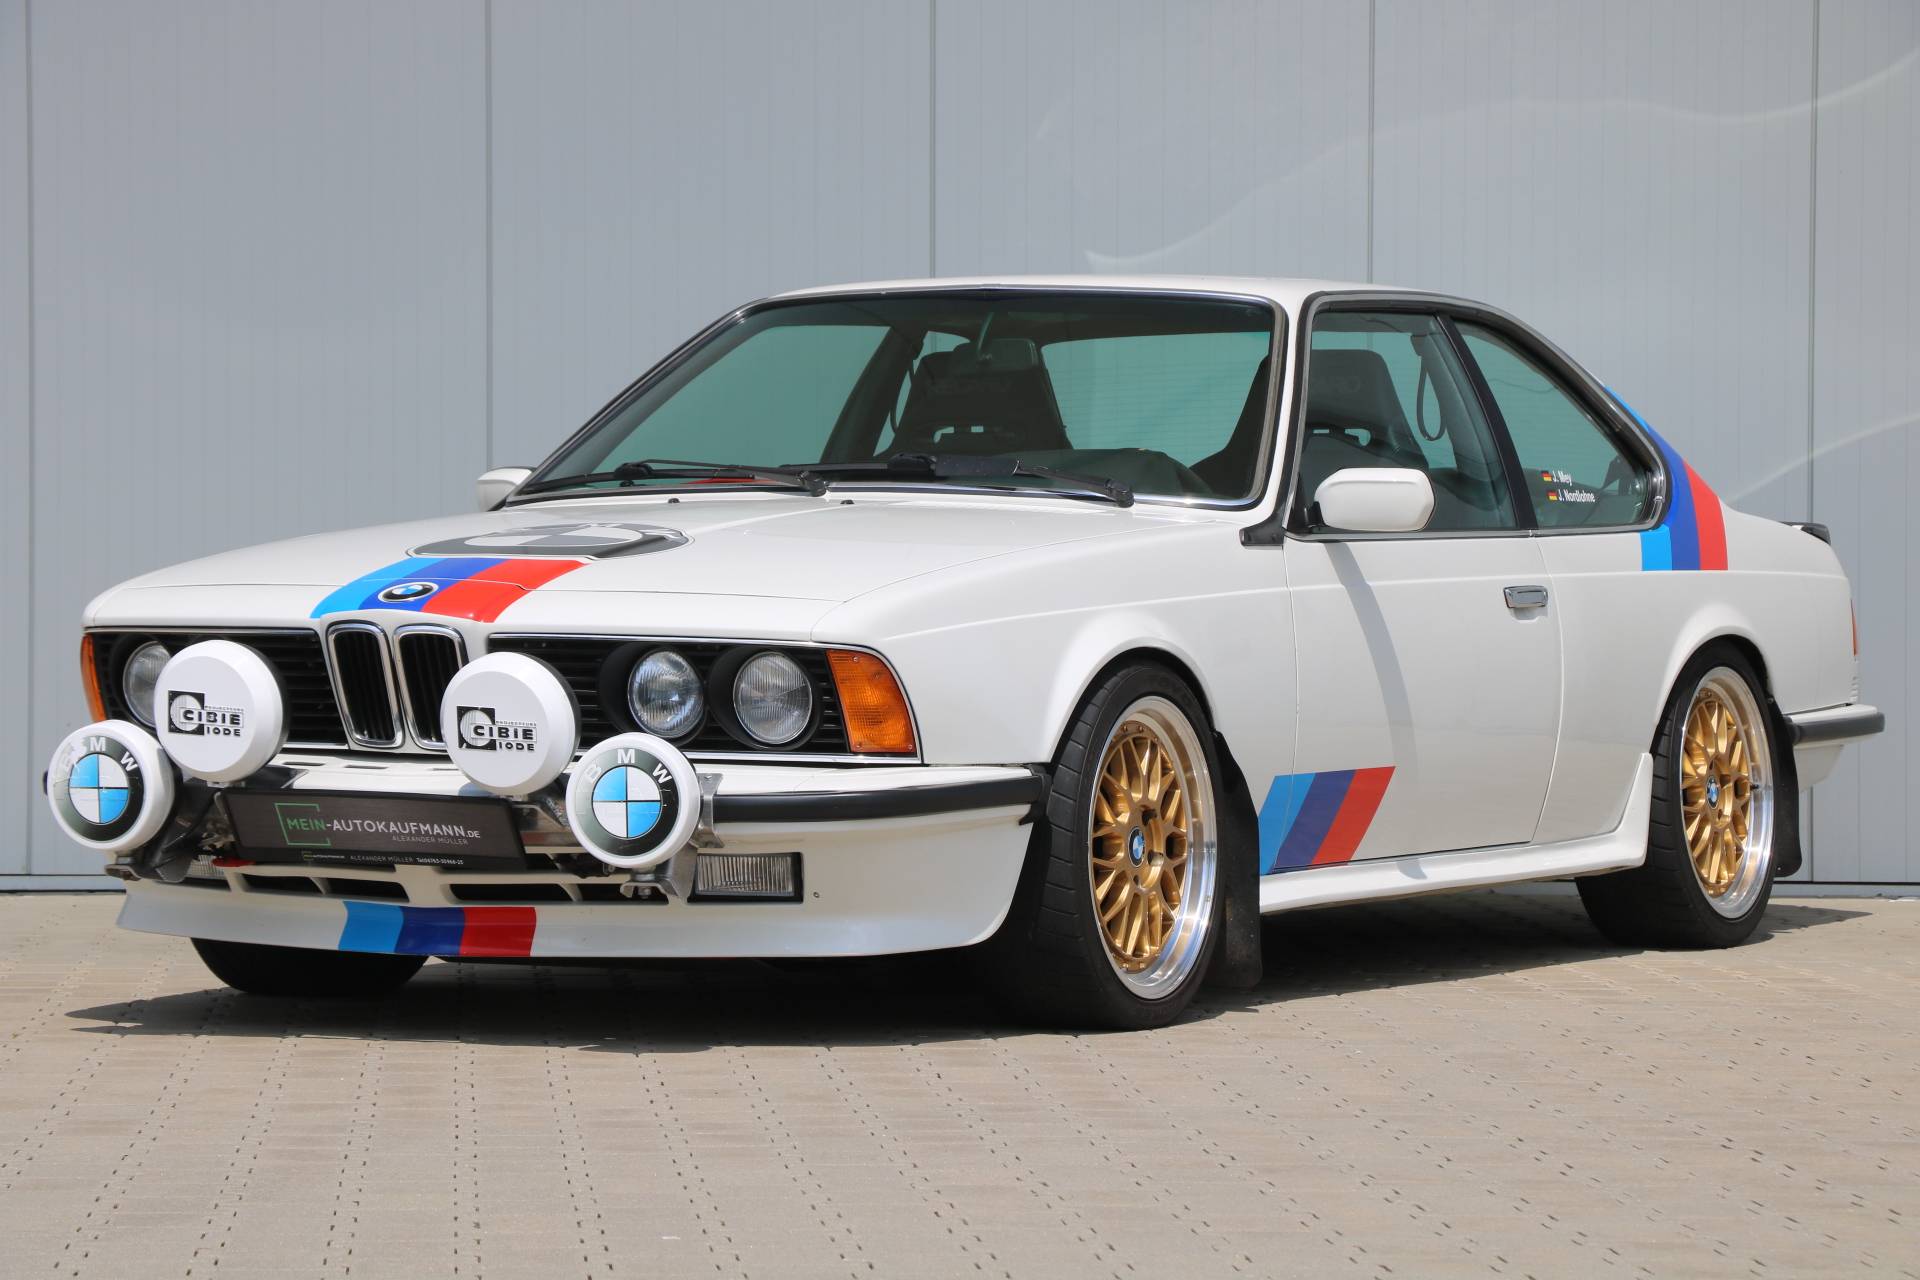 For Sale: BMW 635 CSi (1986) offered for €46,635